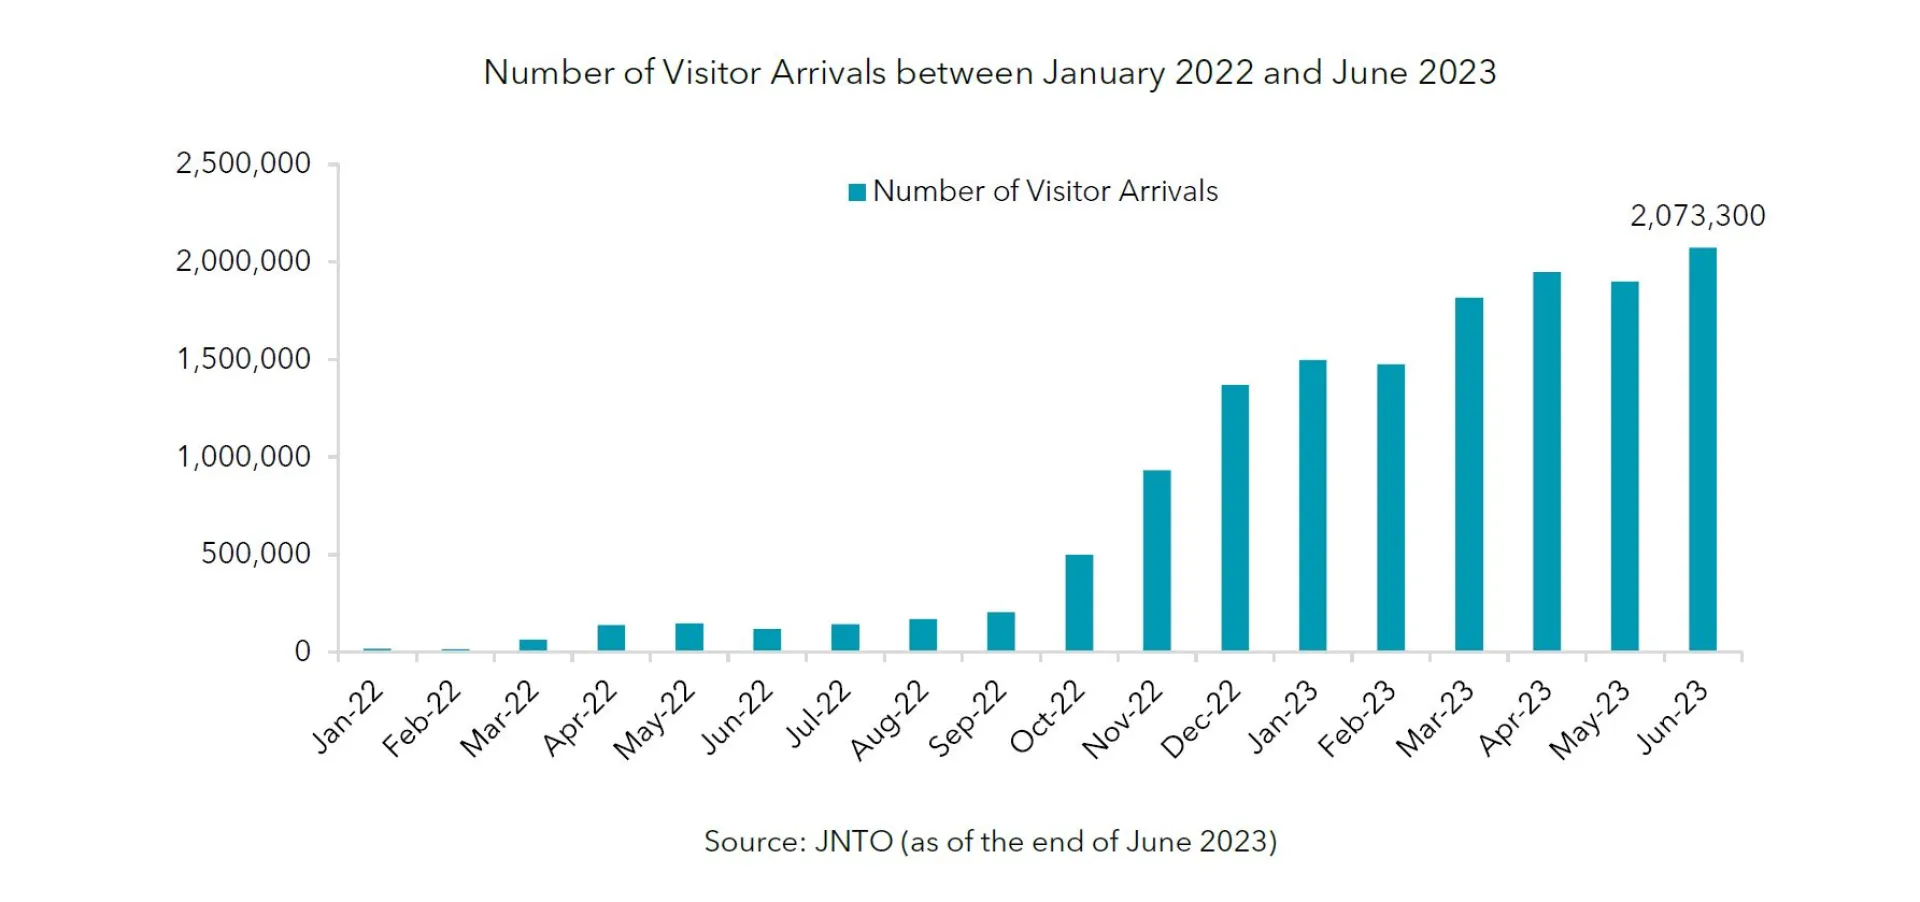 Number of Visitor Arrivals between Jan 2022 and Jun 2023